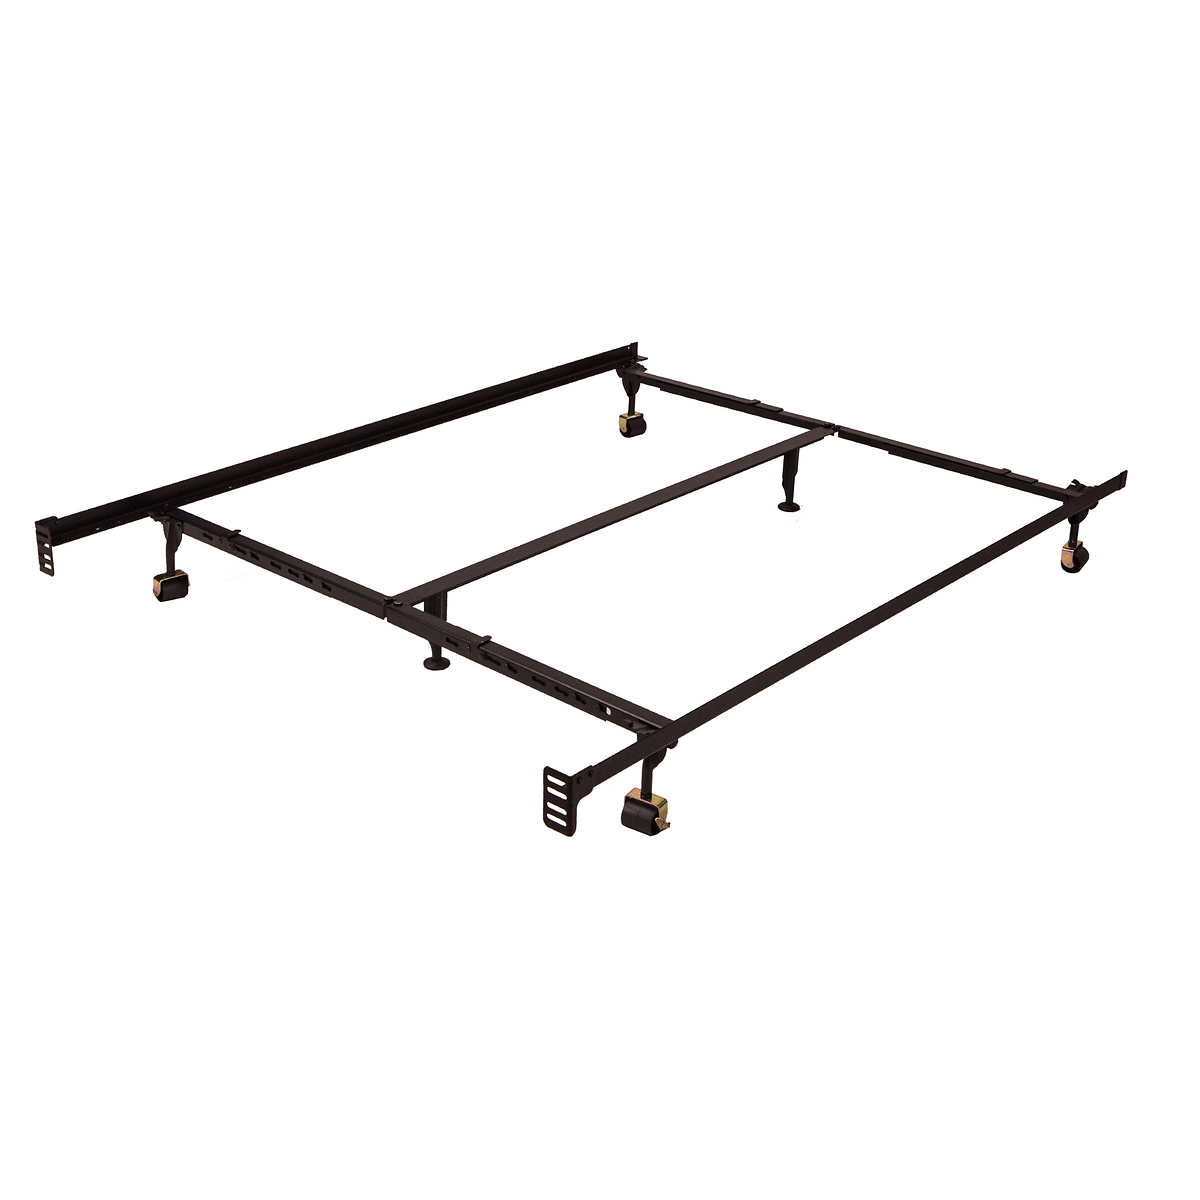 Premium Universal Lev R Lock Bed Frame, Do Metal Bed Frames Fit All Sizes